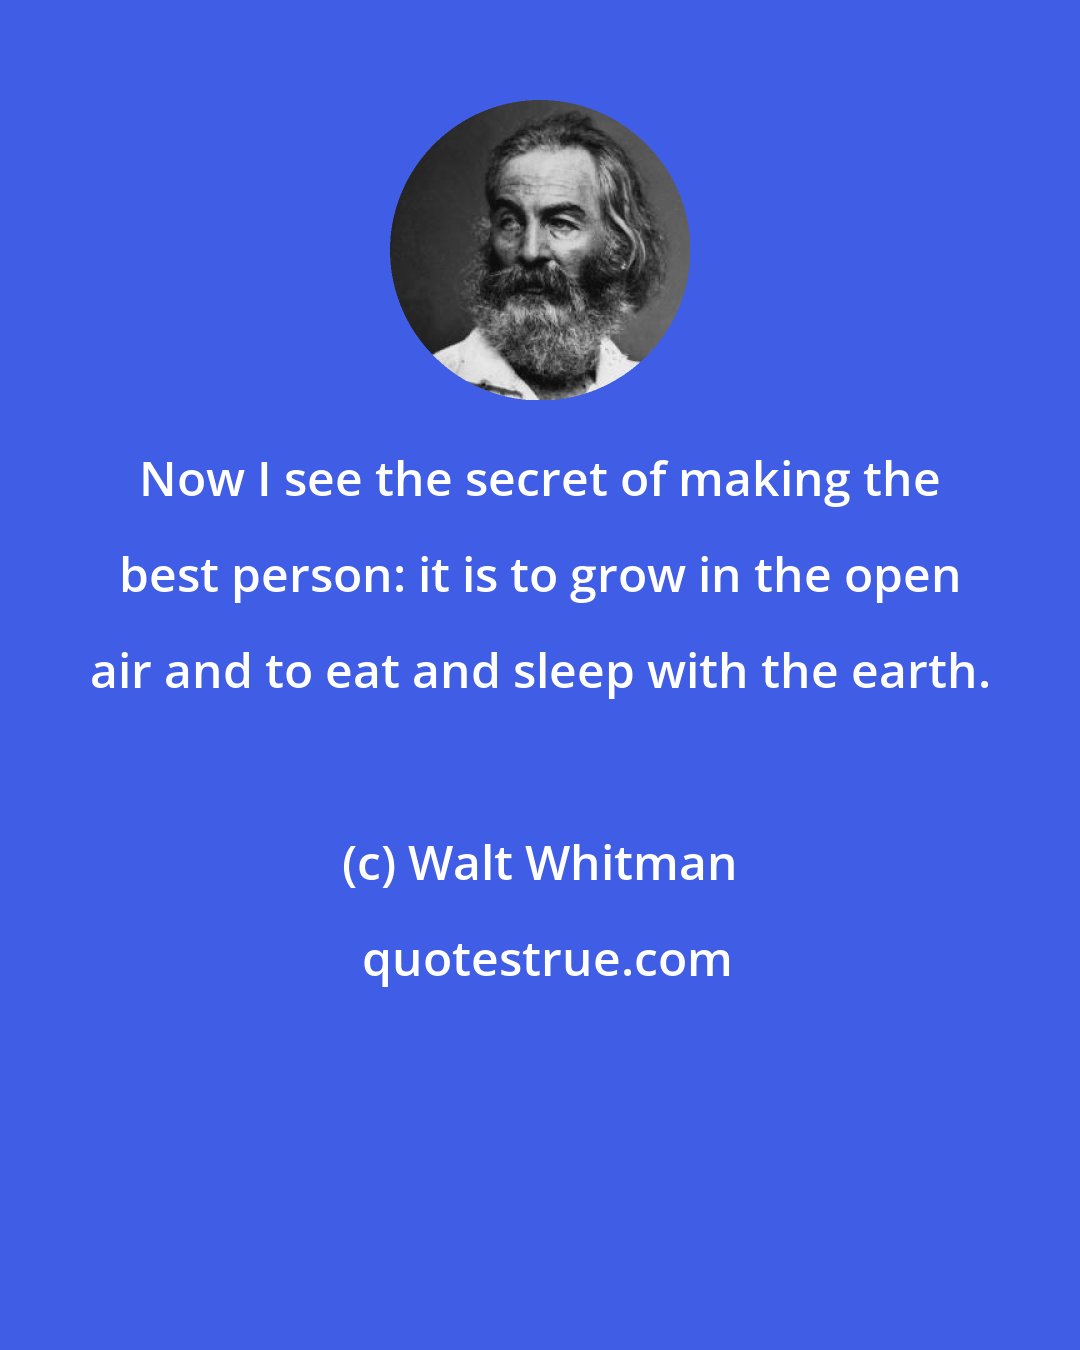 Walt Whitman: Now I see the secret of making the best person: it is to grow in the open air and to eat and sleep with the earth.